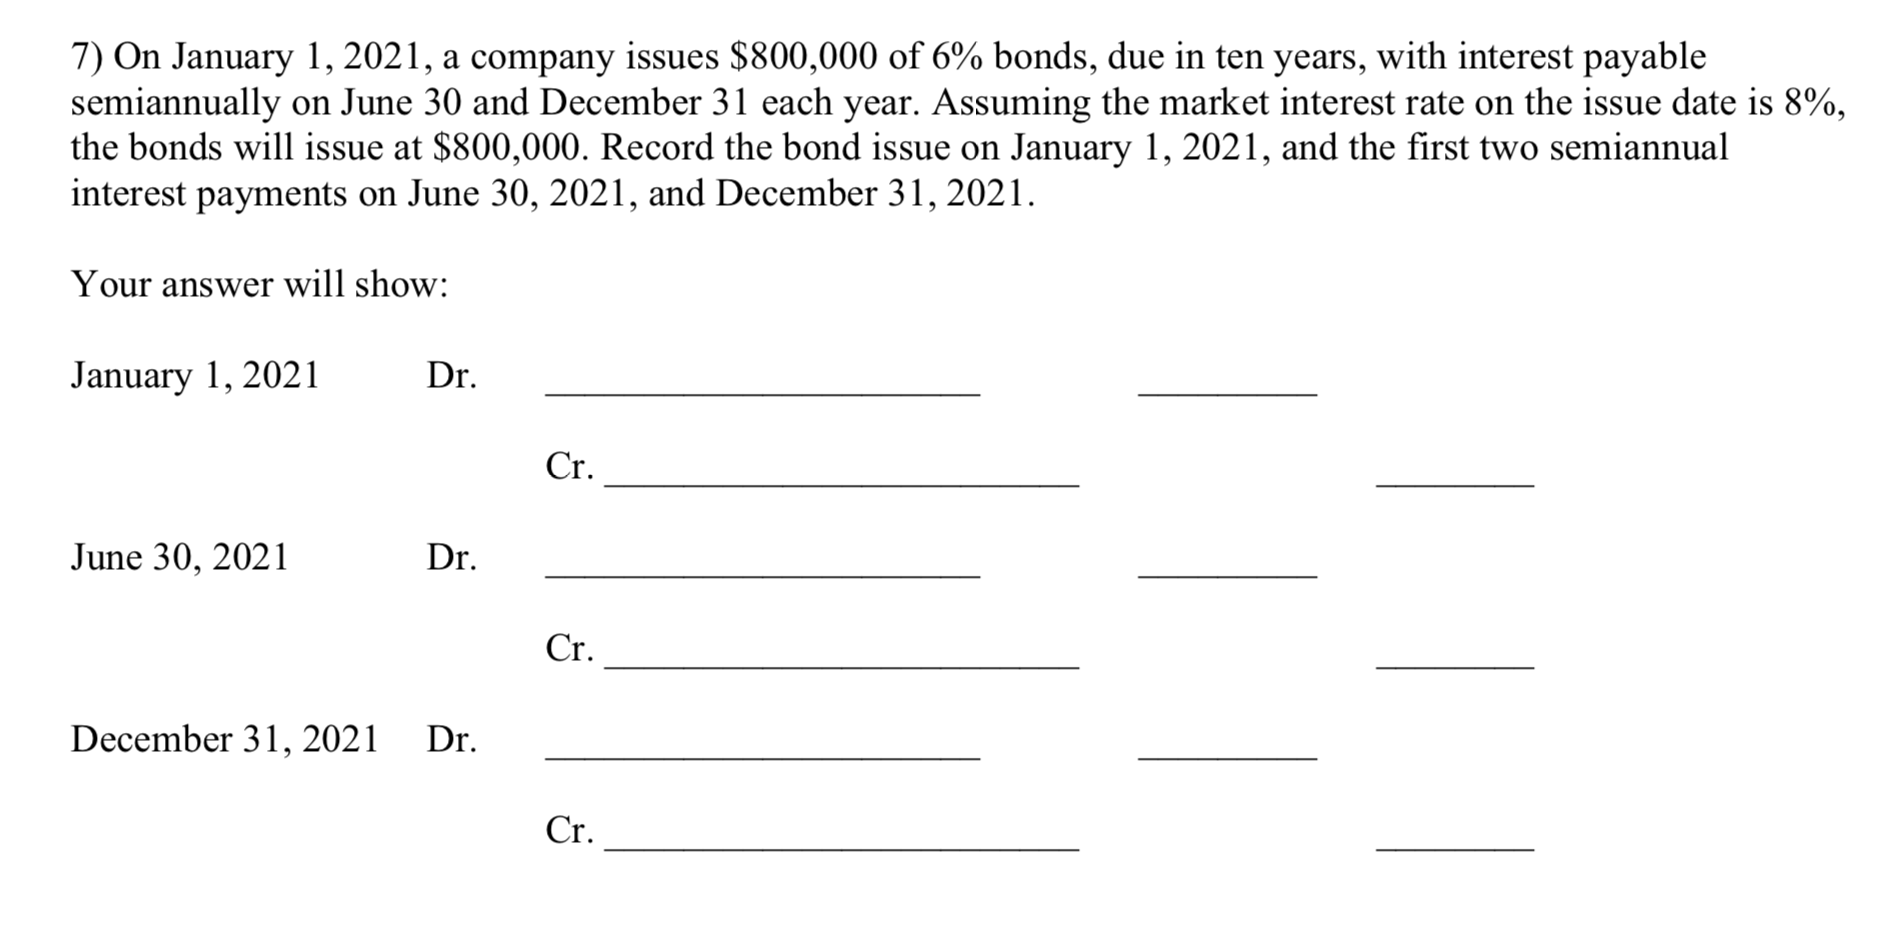 7) On January 1, 2021, a company issues $800,000 of 6% bonds, due in ten years, with interest payable
semiannually on June 30 and December 31 each year. Assuming the market interest rate on the issue date is 8%,
the bonds will issue at $800,000. Record the bond issue on January 1, 2021, and the first two semiannual
interest payments on June 30, 2021, and December 31, 2021.
Your answer will show:
January 1, 2021
Dr.
Cr.
June 30, 2021
Dr.
Cr.
December 31, 2021
Dr.
Cr.
